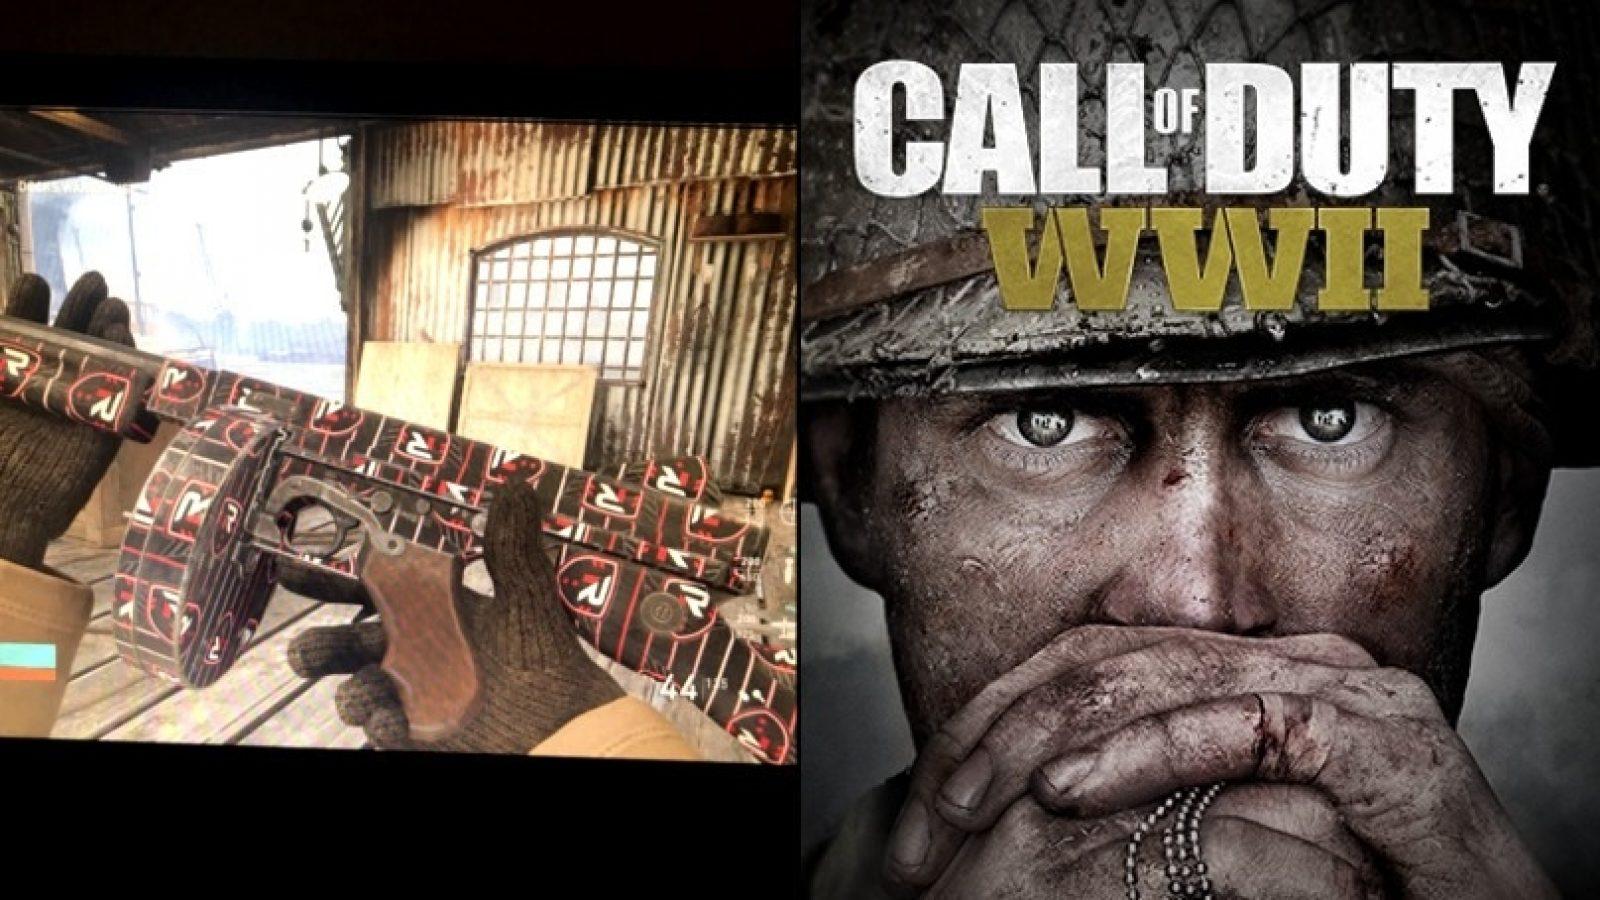 CALL OF DUTY: WW2 - CONFIRMED REAL ALMOST! (Call of Duty World War 2) 